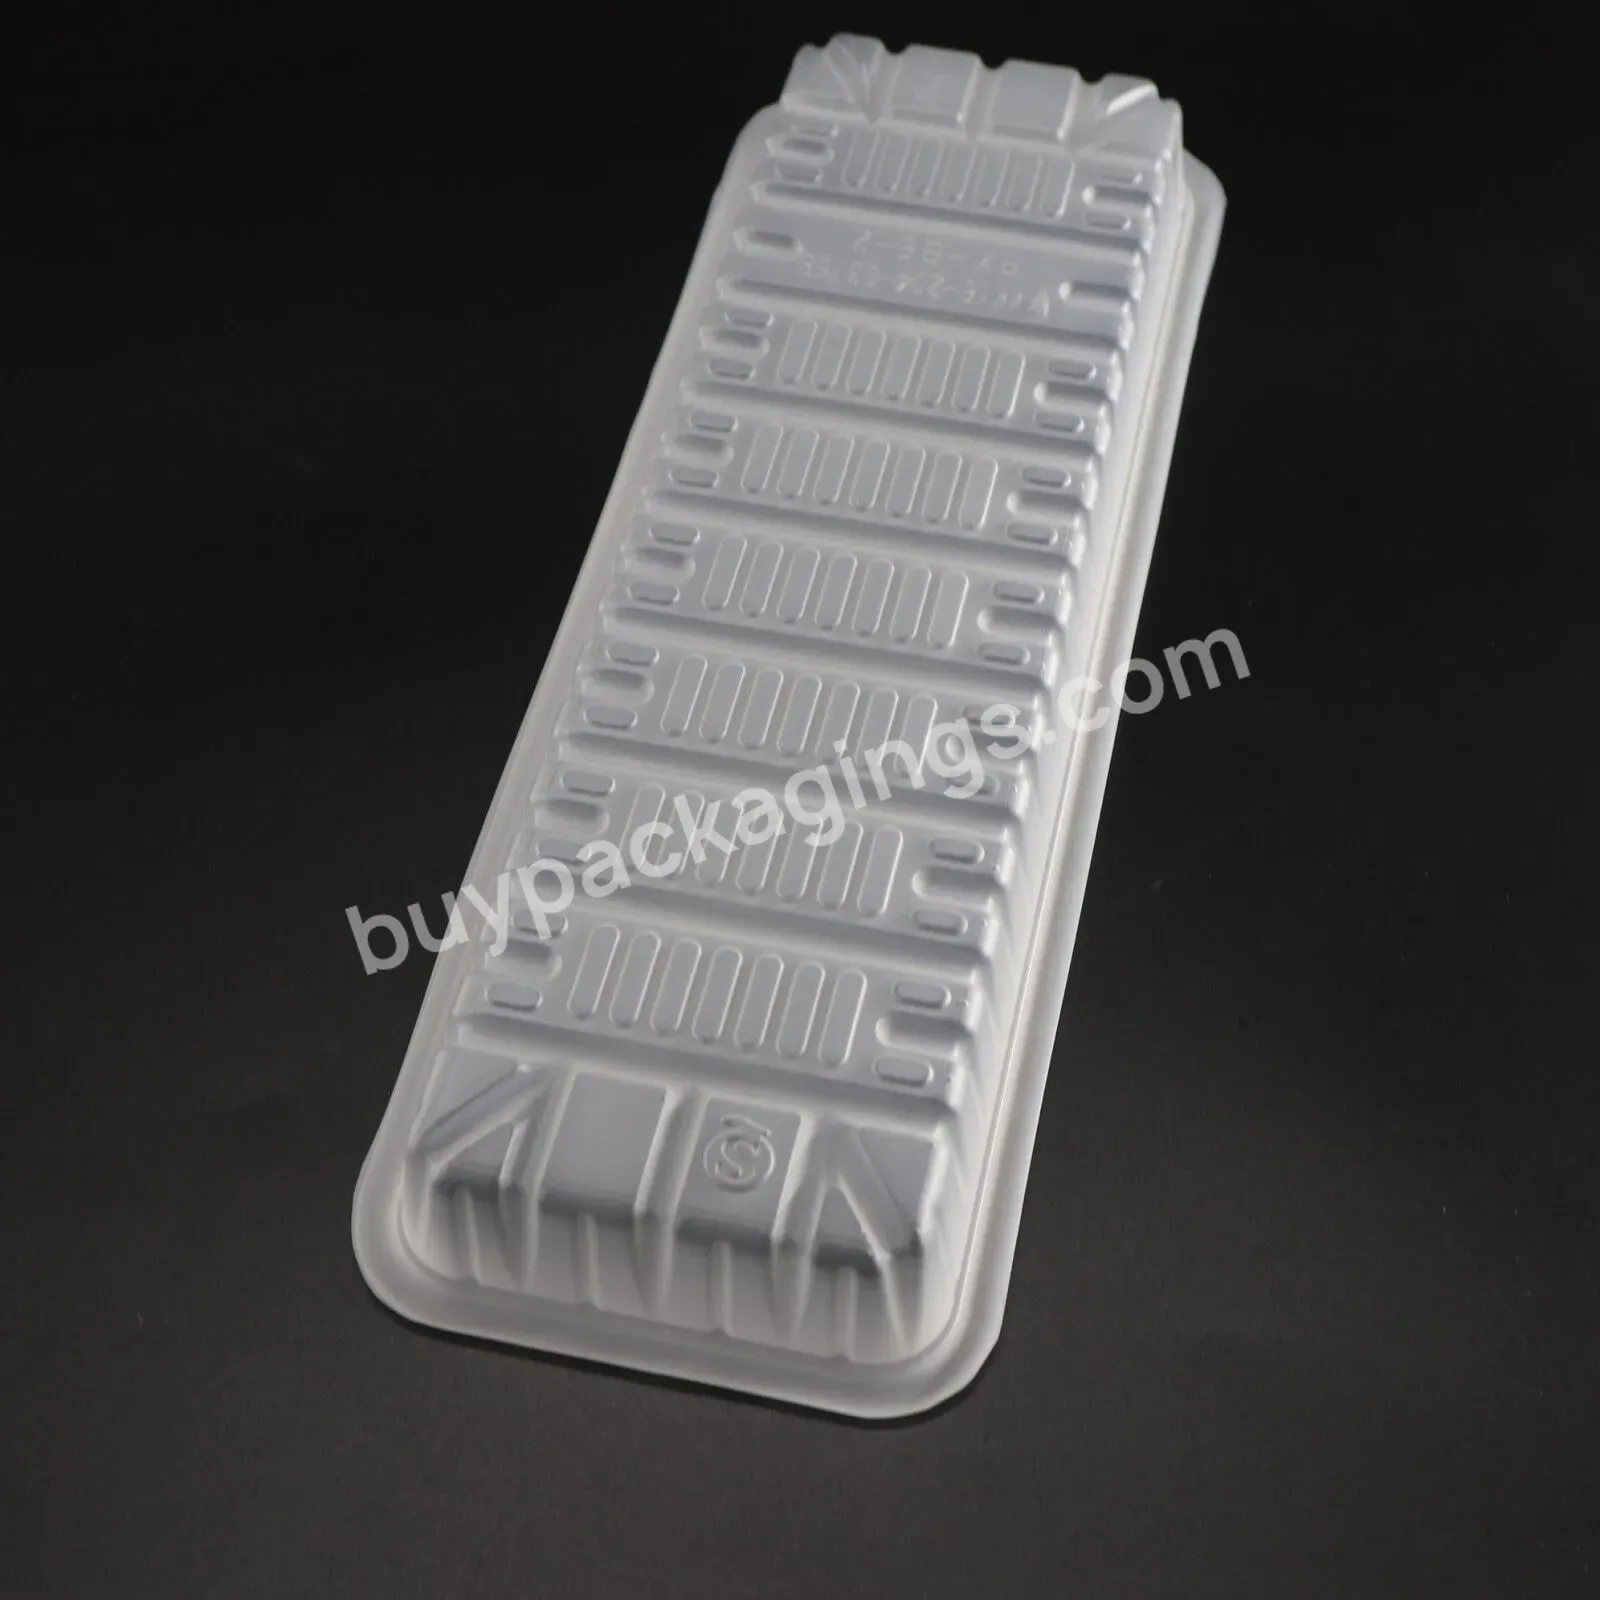 Disposable Biodegradable Plastic Thawing Tray For Frozen Pet Meat Trays Manufacture In China - Buy Disposable Tray For Meat,Pet Meat Trays Manufacture In China,Plastic Frozen Meat Trays.